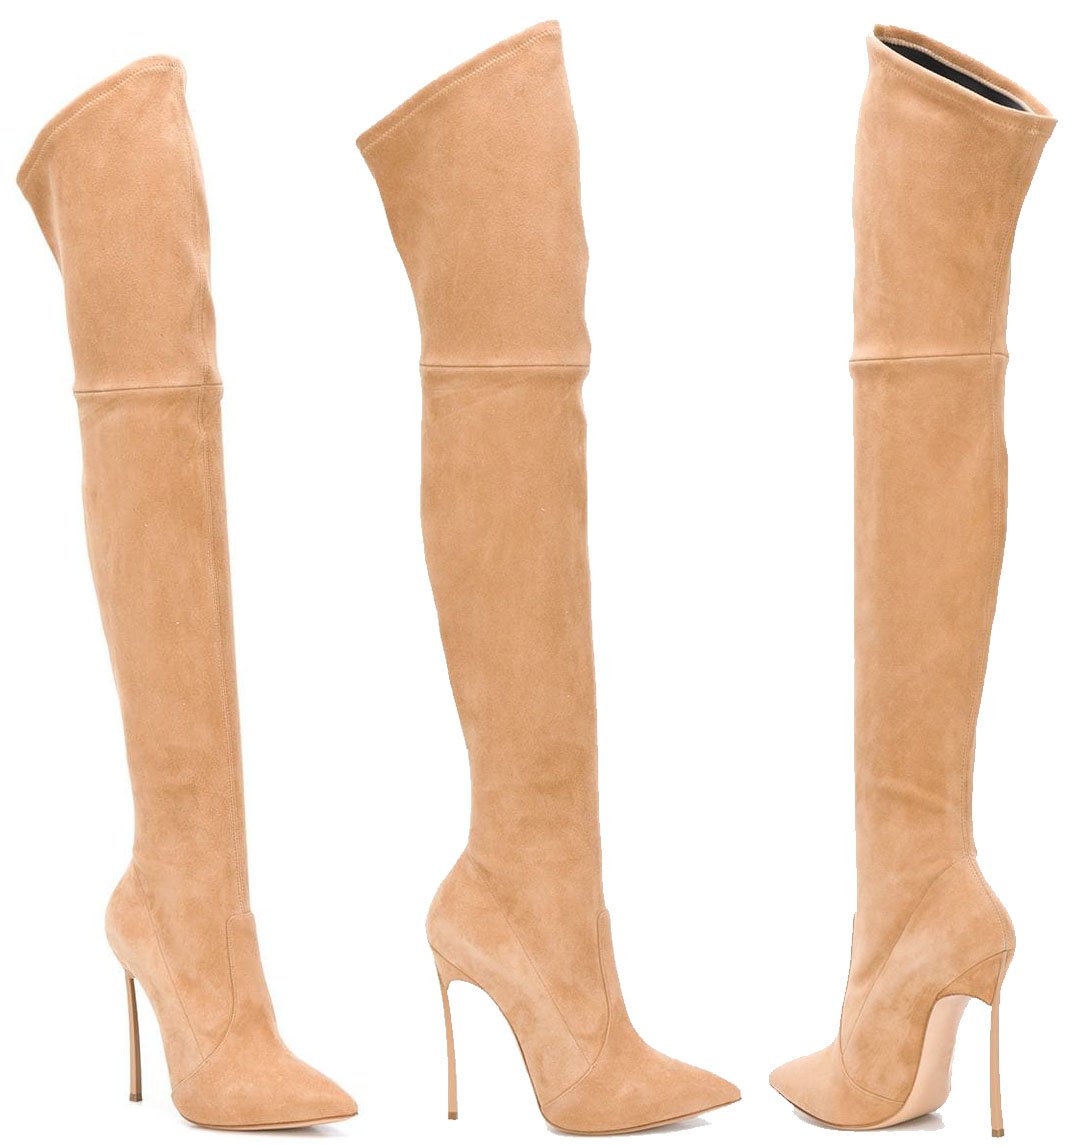 A classic favorite, the Casadei Blade boots feature pointed toes and 5-inch stiletto blade heels